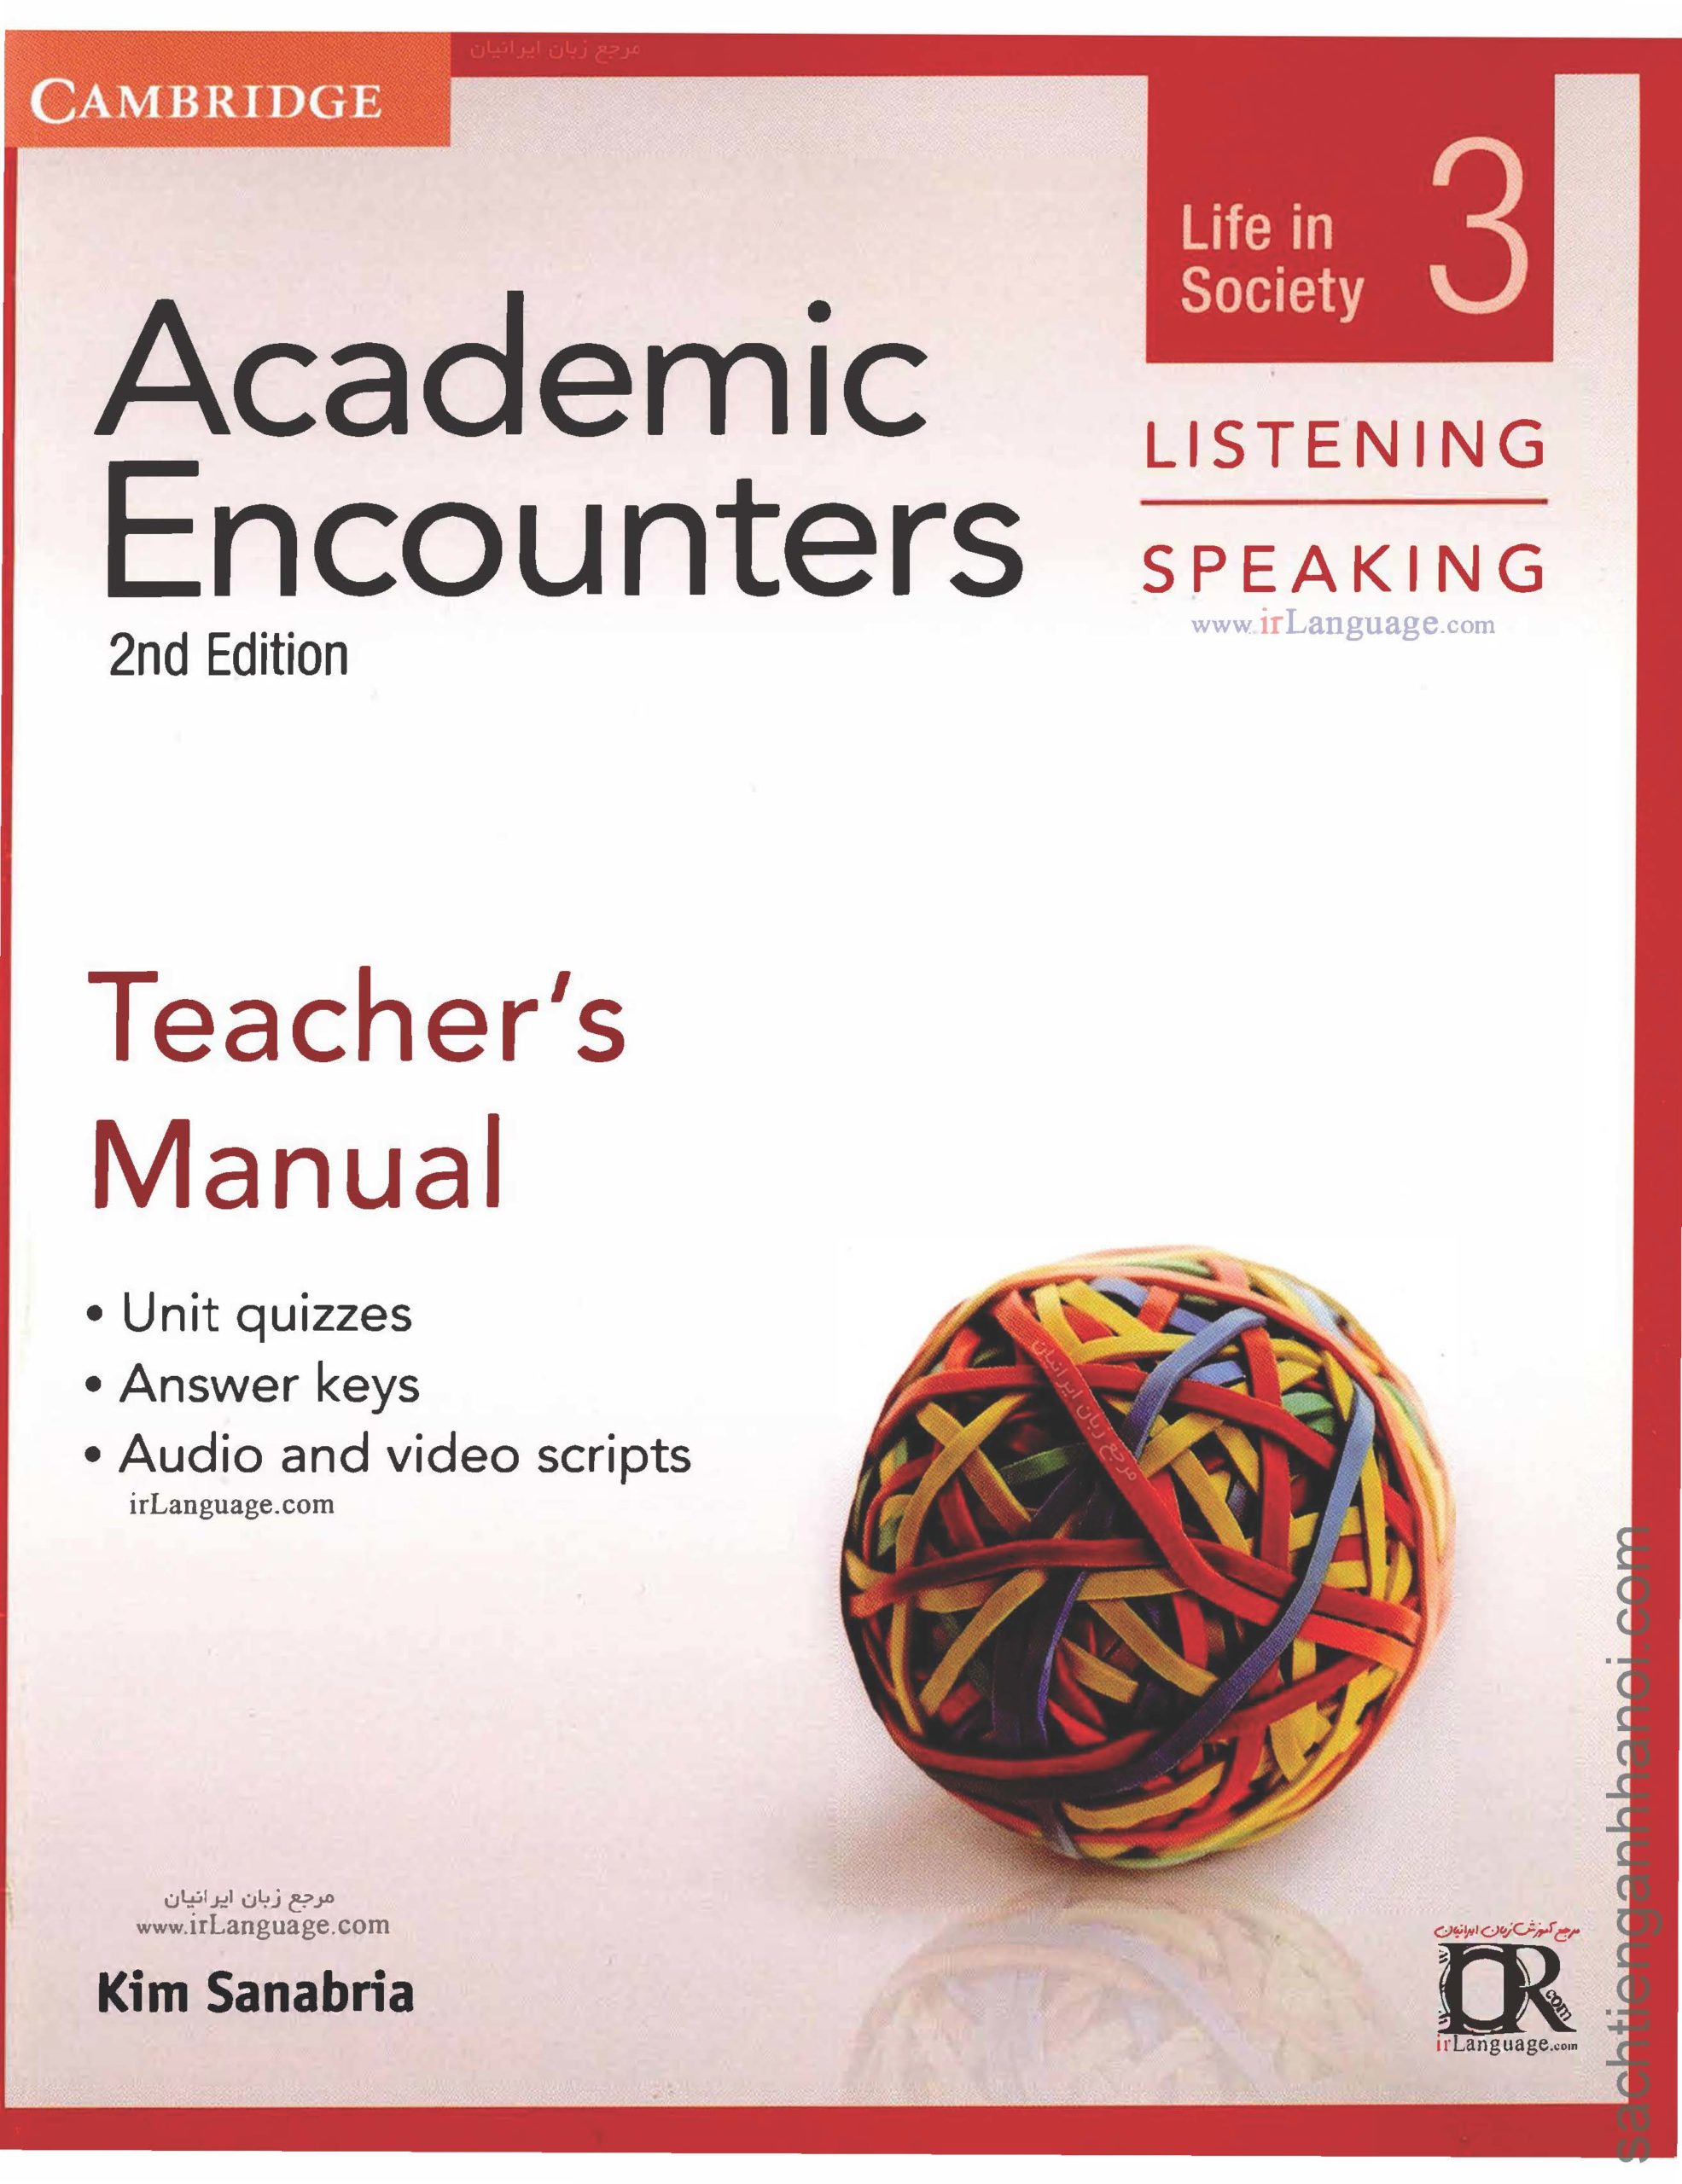 Kim Sanabria Academic Encounters Second edition Life in Society Level 3 Teacher's Manual Listening and Speaking 